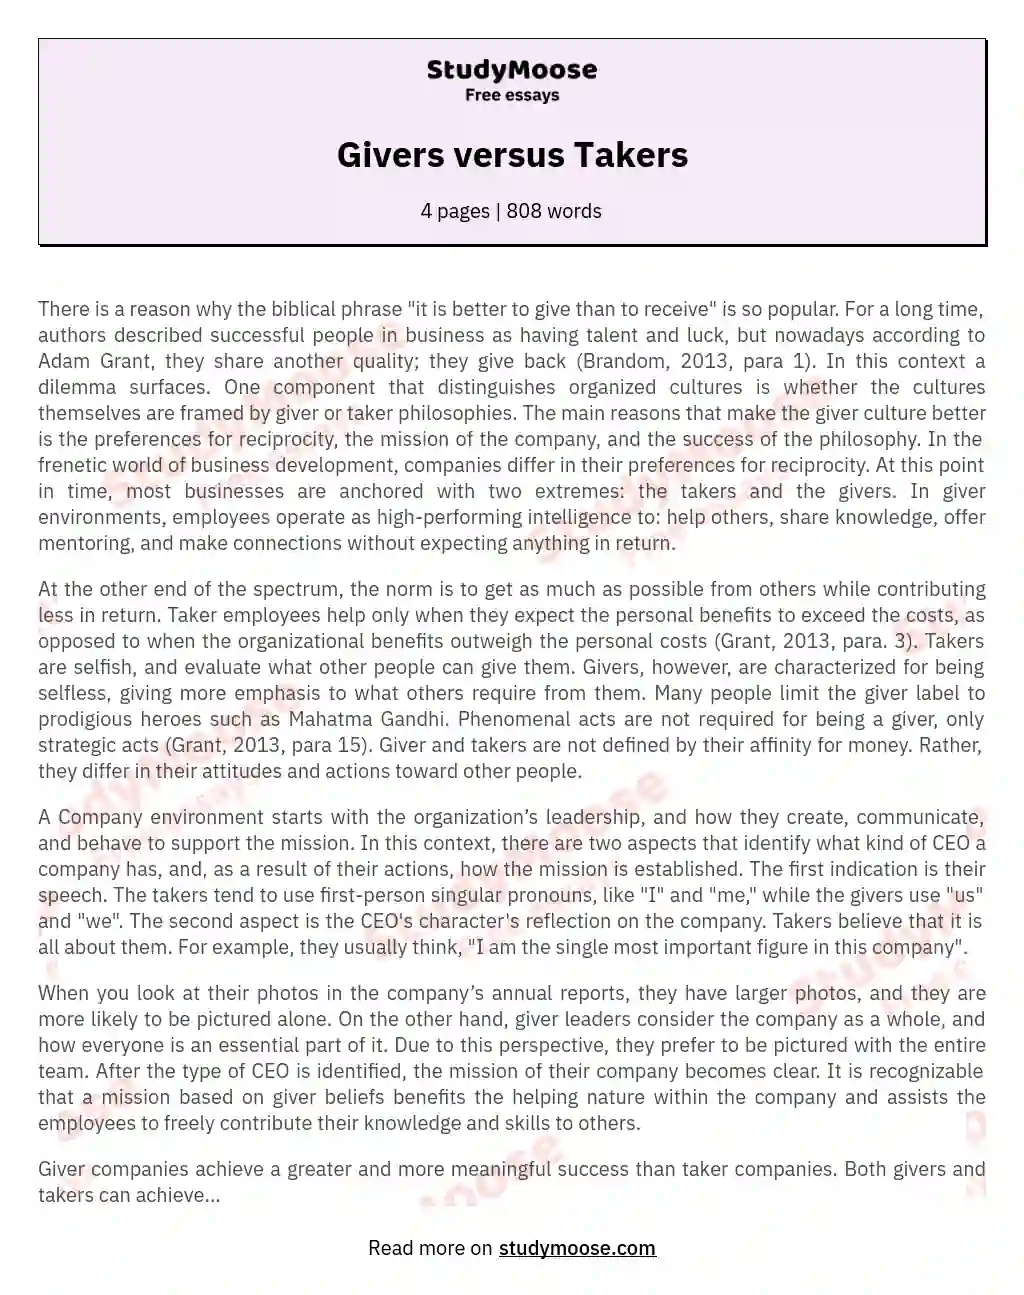 Givers vs. Takers: The Dynamics of Business Interaction essay